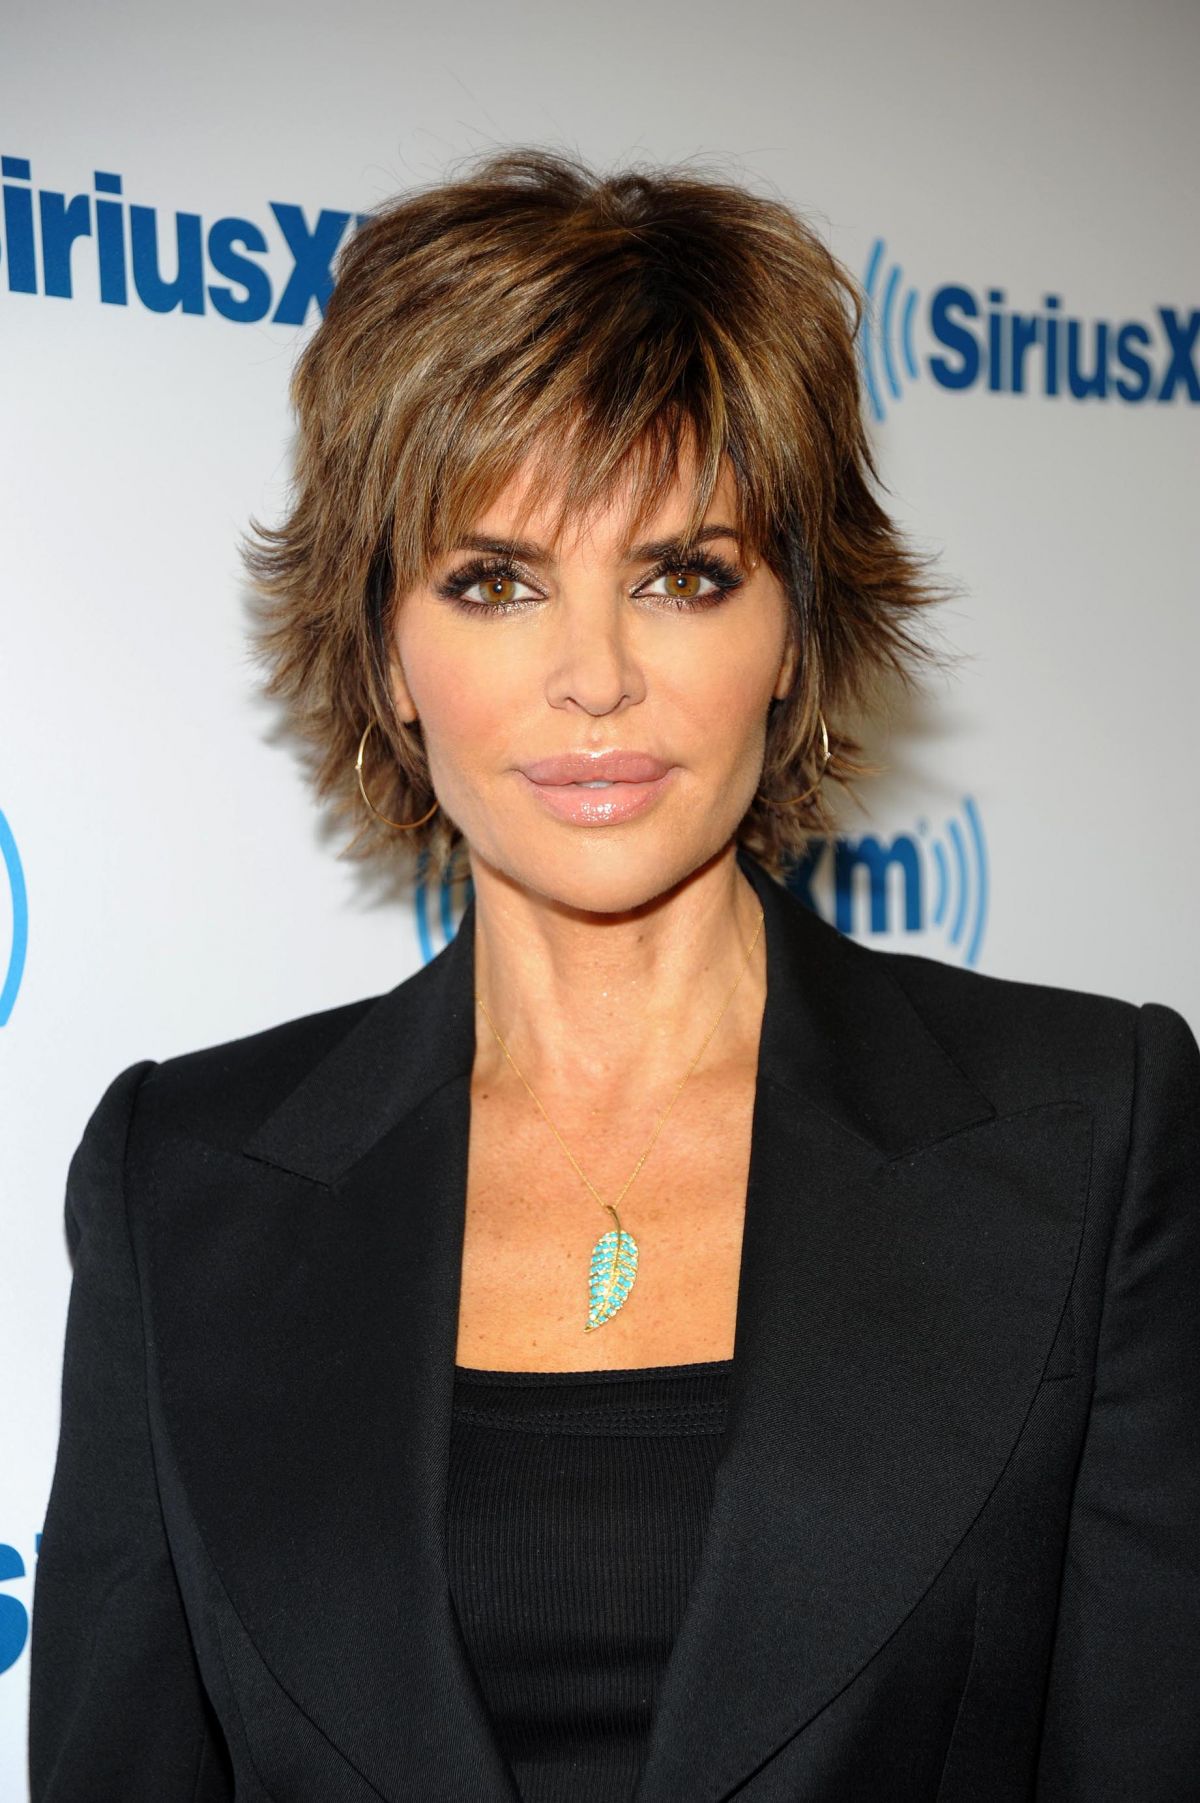 Lisa Rinna Images Recent - Tally Crissie